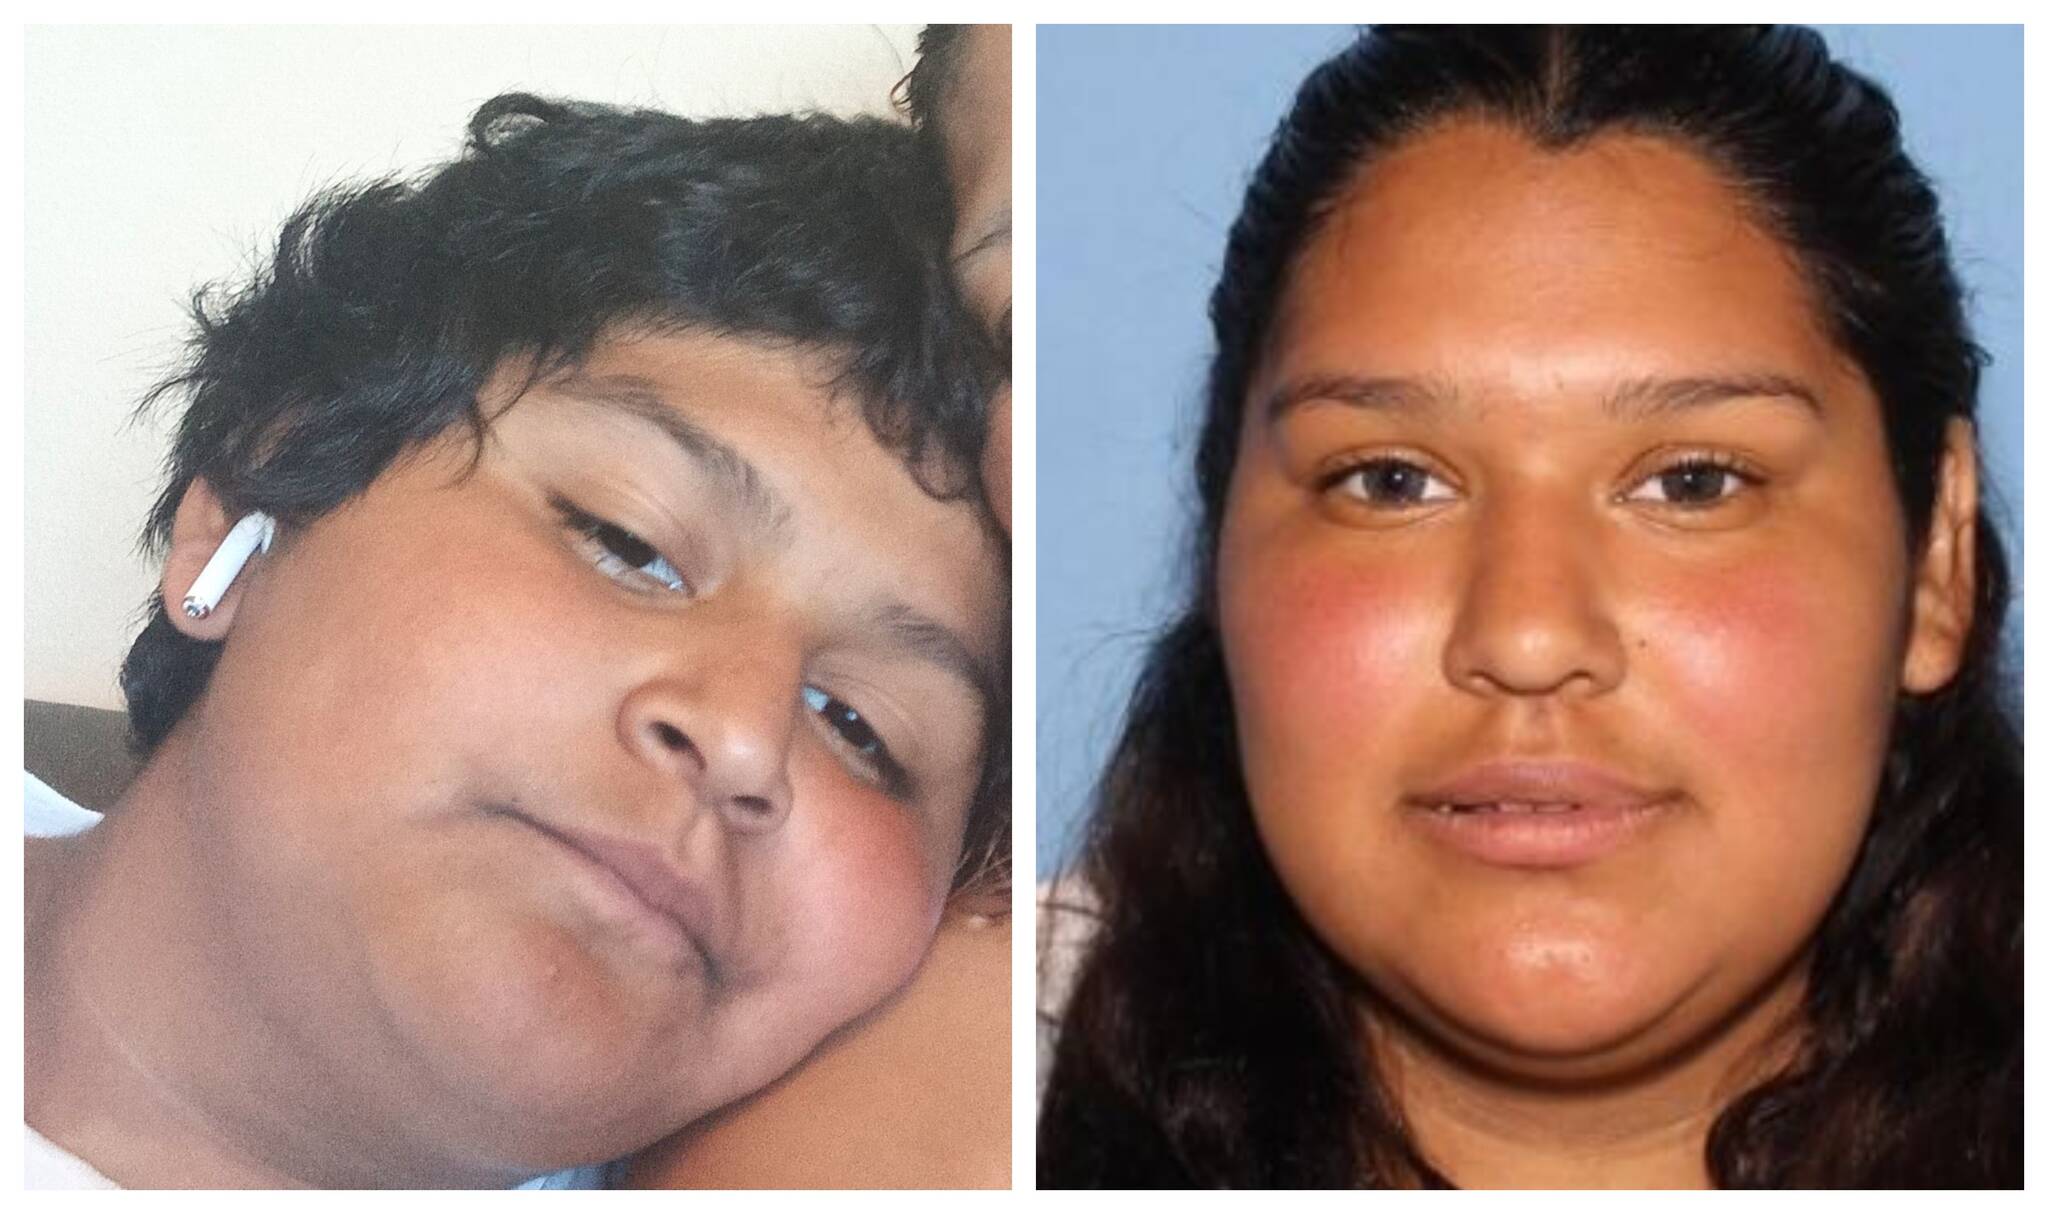 Aberdeen police are seeking information on a pair of siblings missing from West Aberdeen since Tuesday afternoon. (Courtesy art / Aberdeen Police Department)